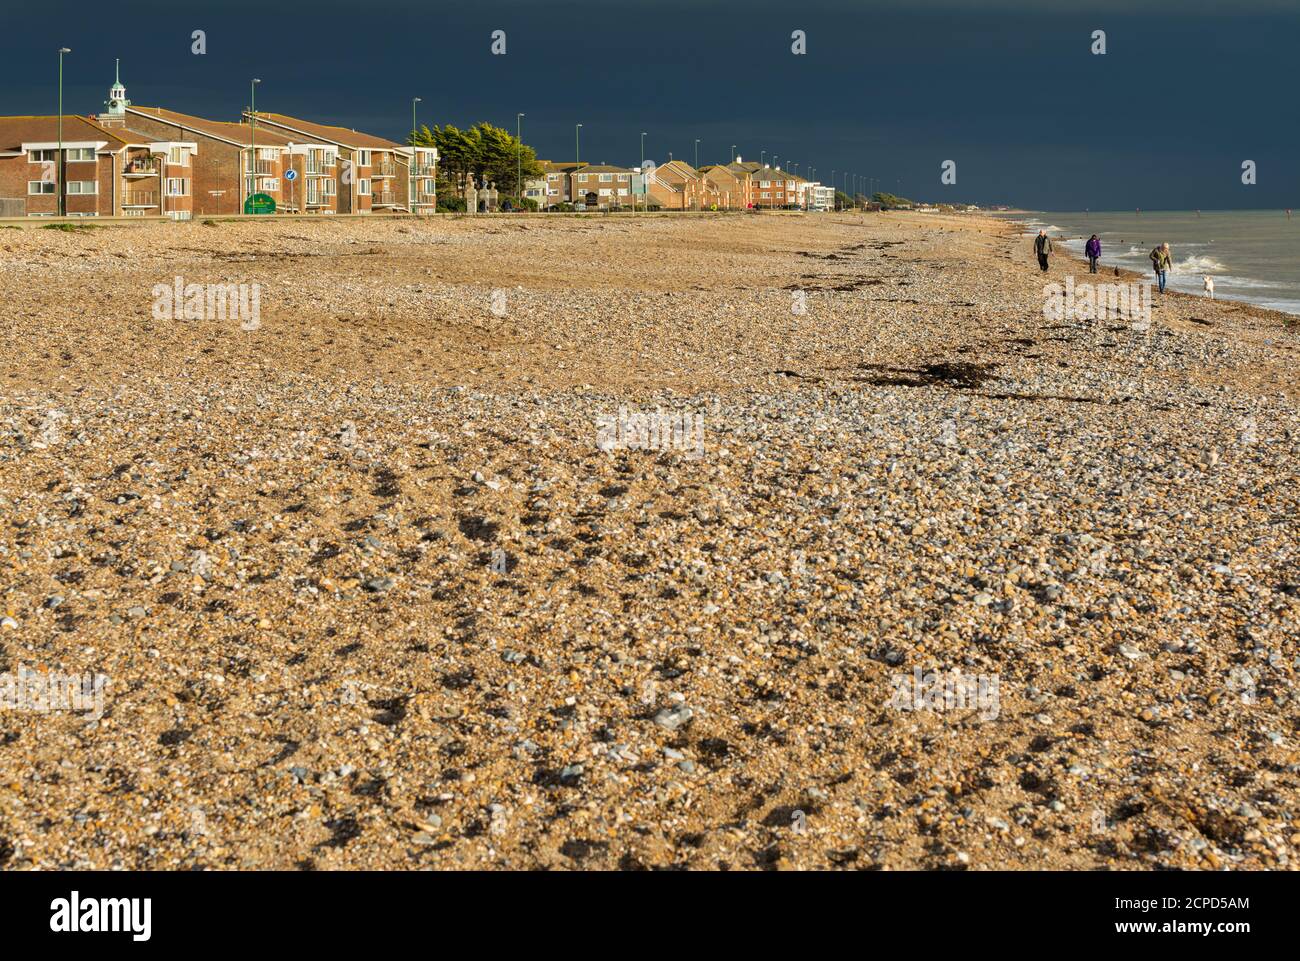 Dark storm clouds approaching the seaside with sunlight lighting up the shingle beach, which is nearly deserted, in England, UK. Stock Photo